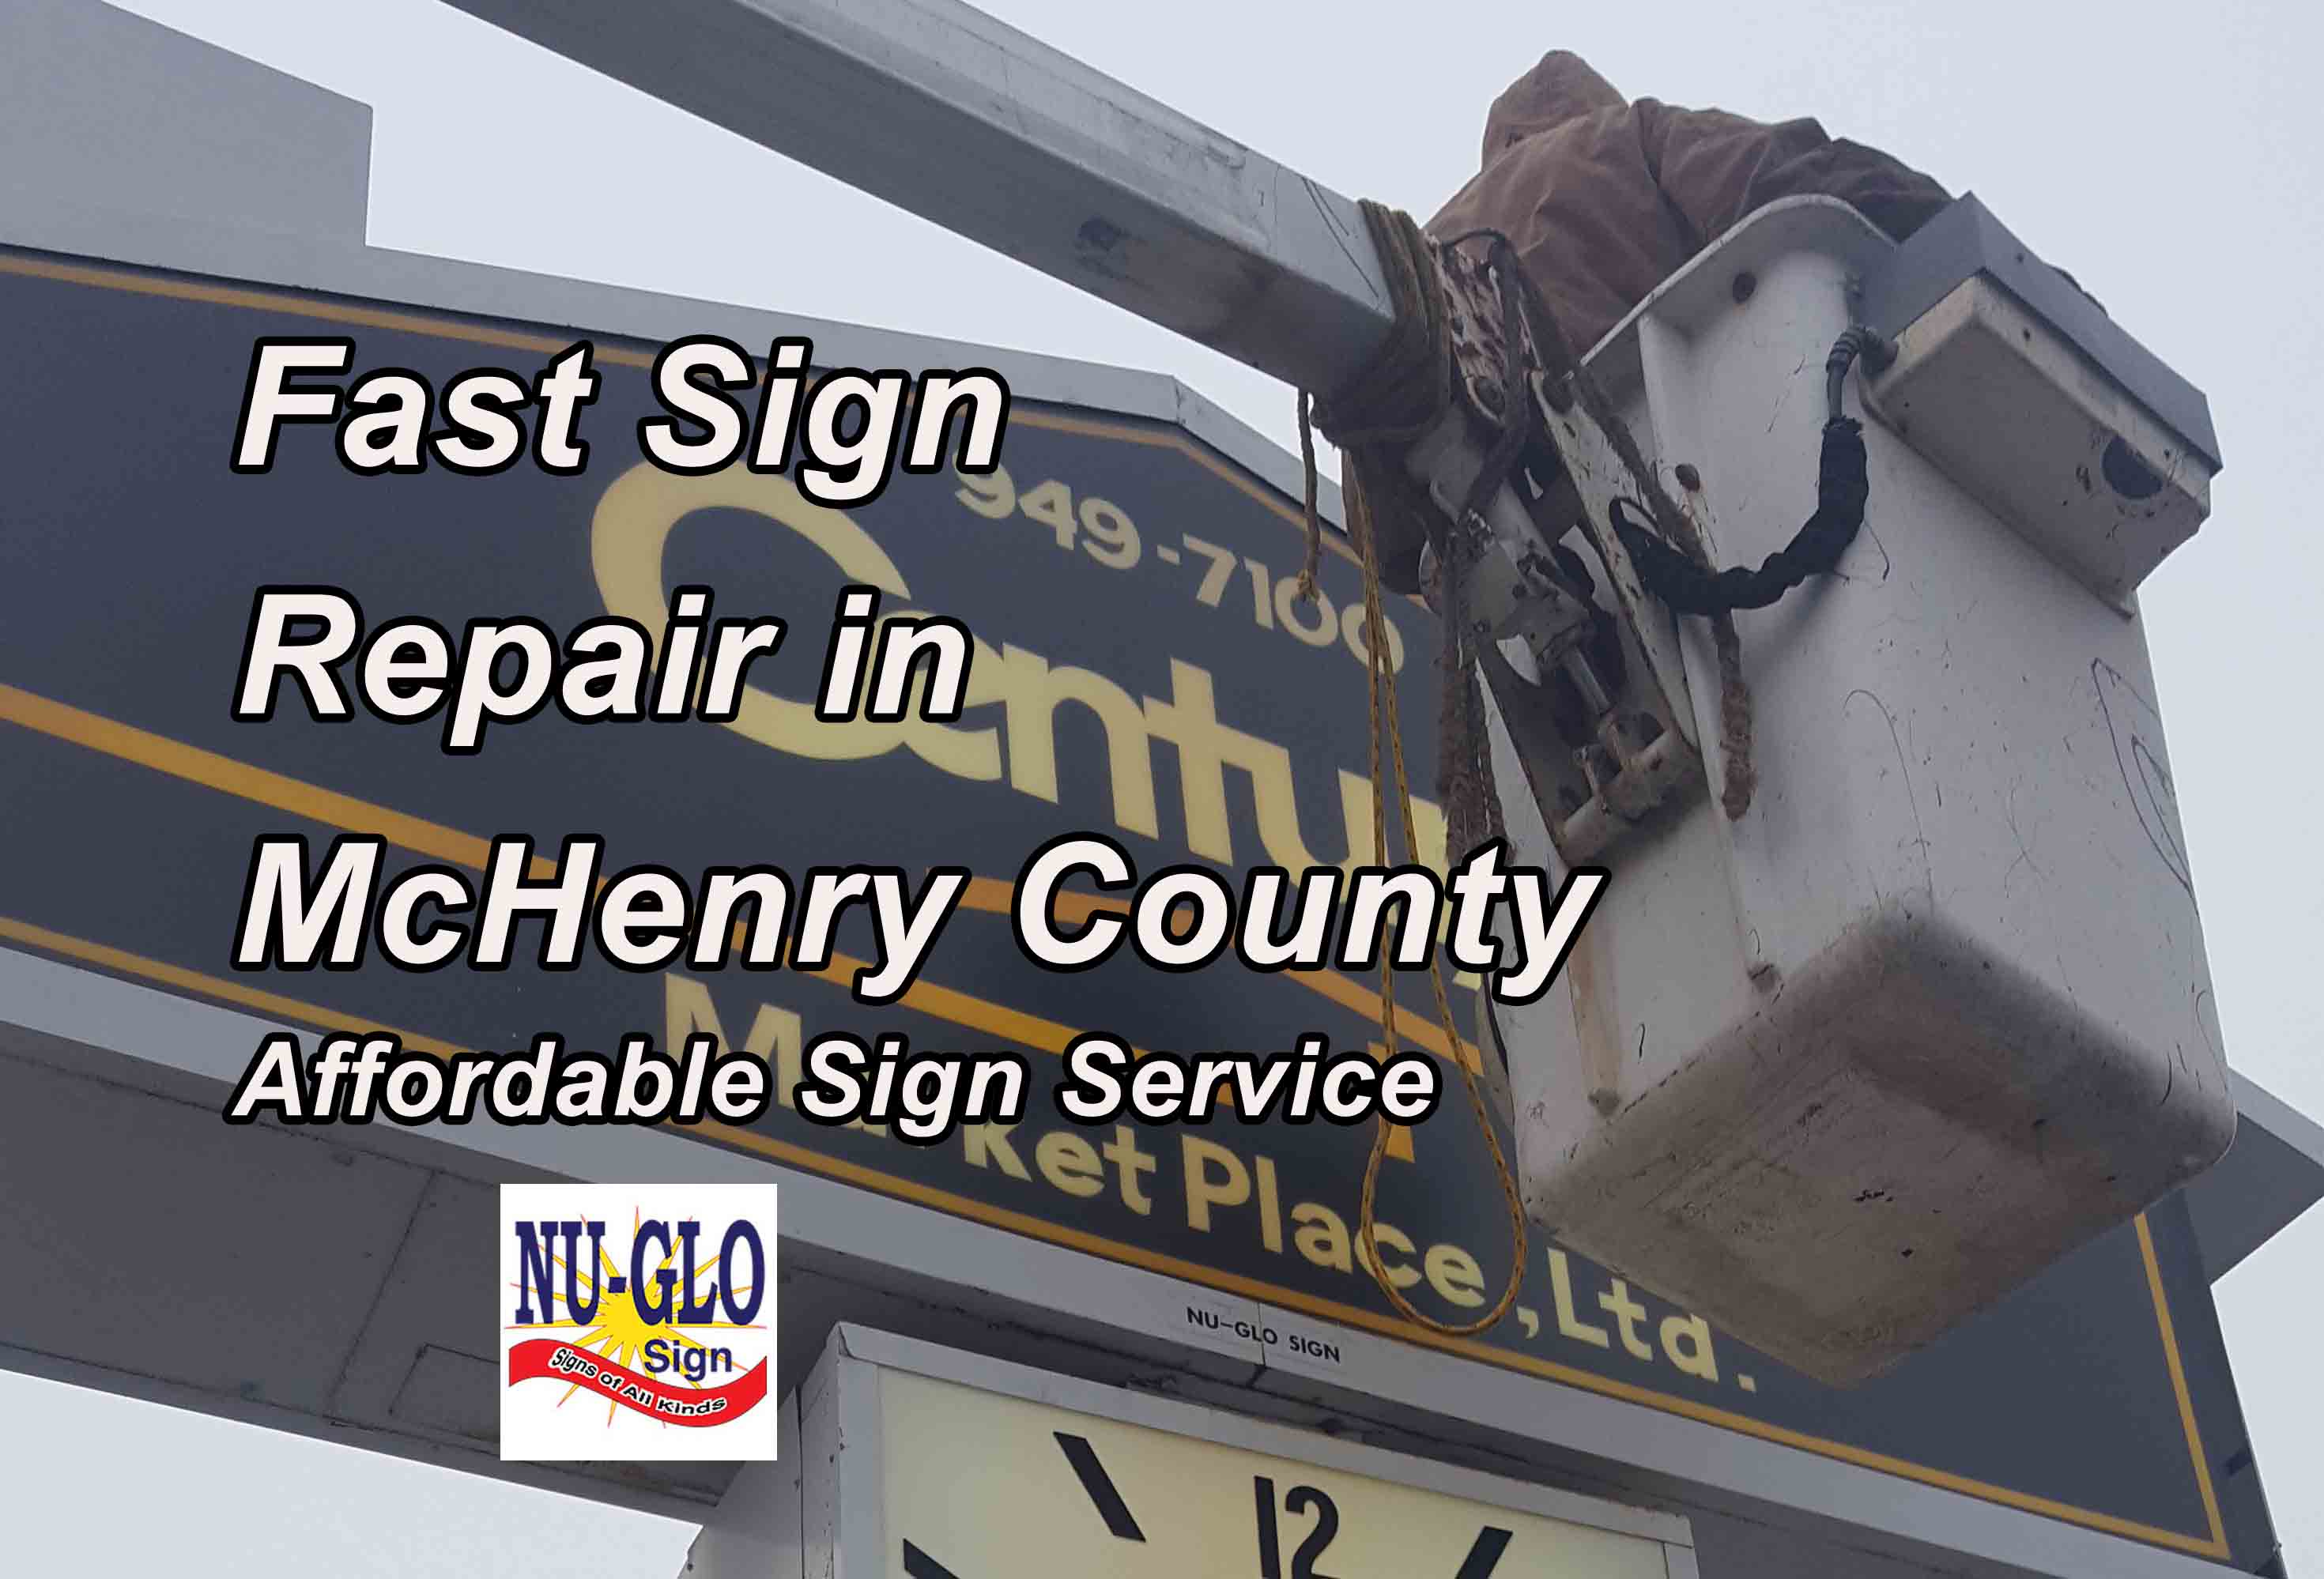 Business Signs - Lake of the Hills Illinois - sign repair